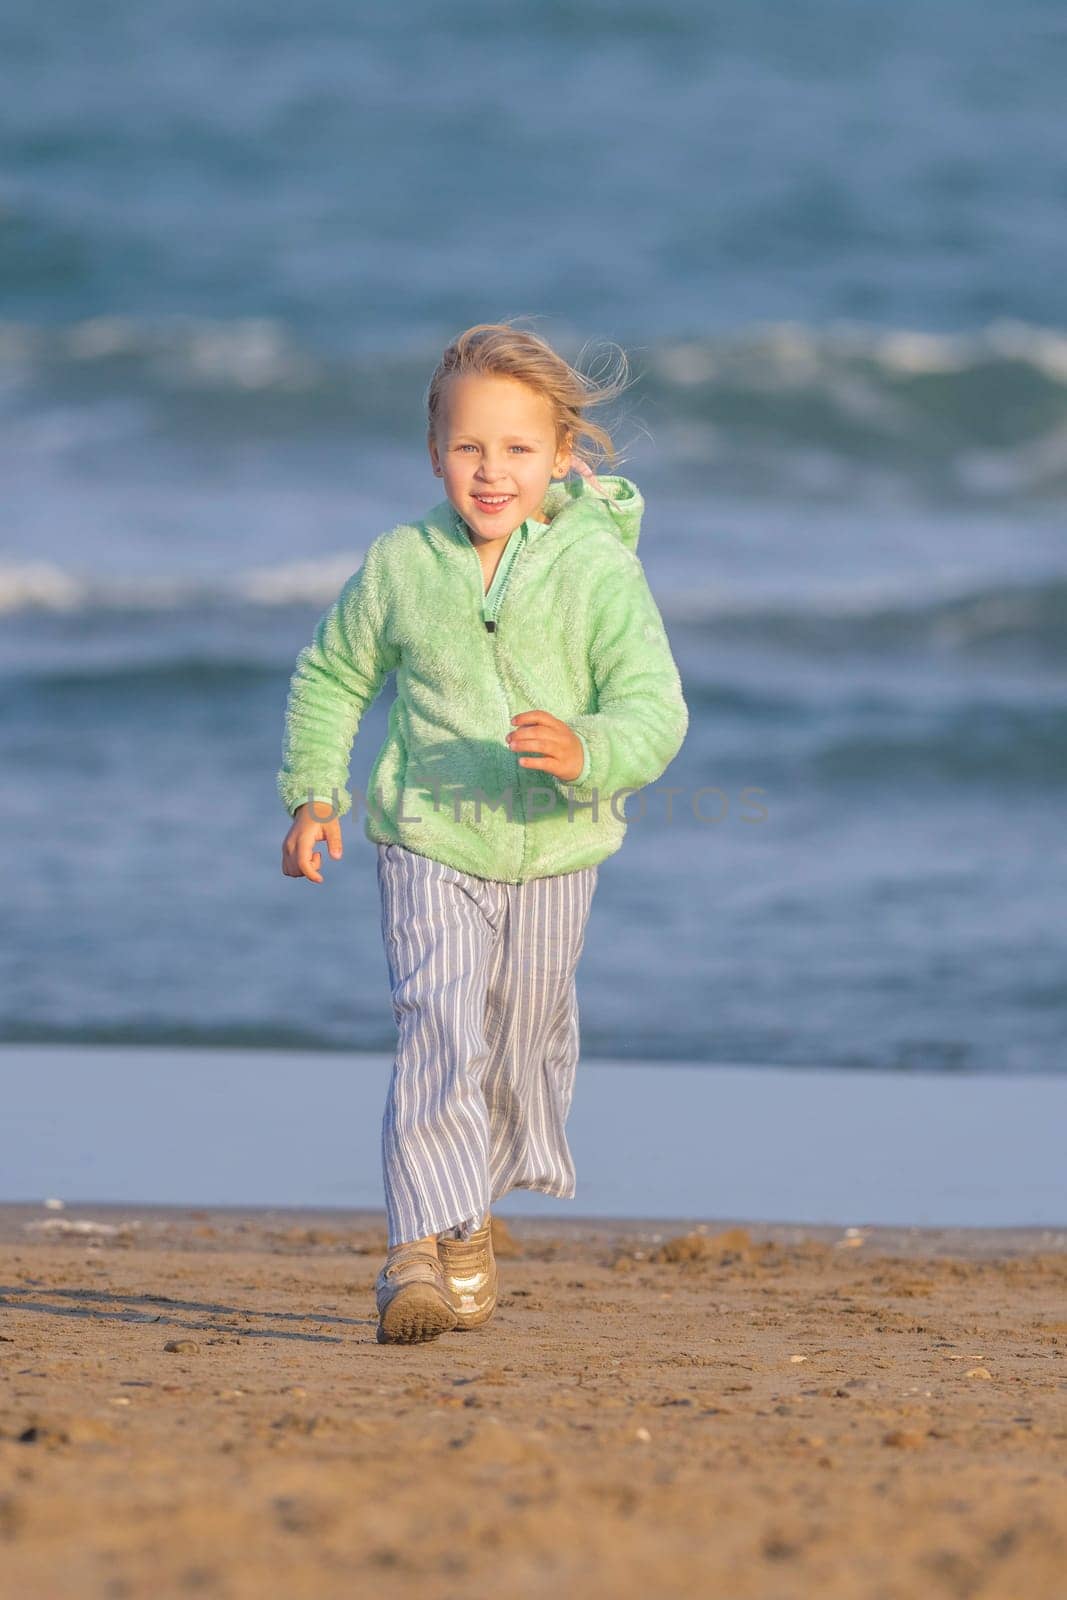 Long shot - vertical photo of girl 5-year-old, a blonde, in a green jacket runs along the beach by the sea, wearing a smile